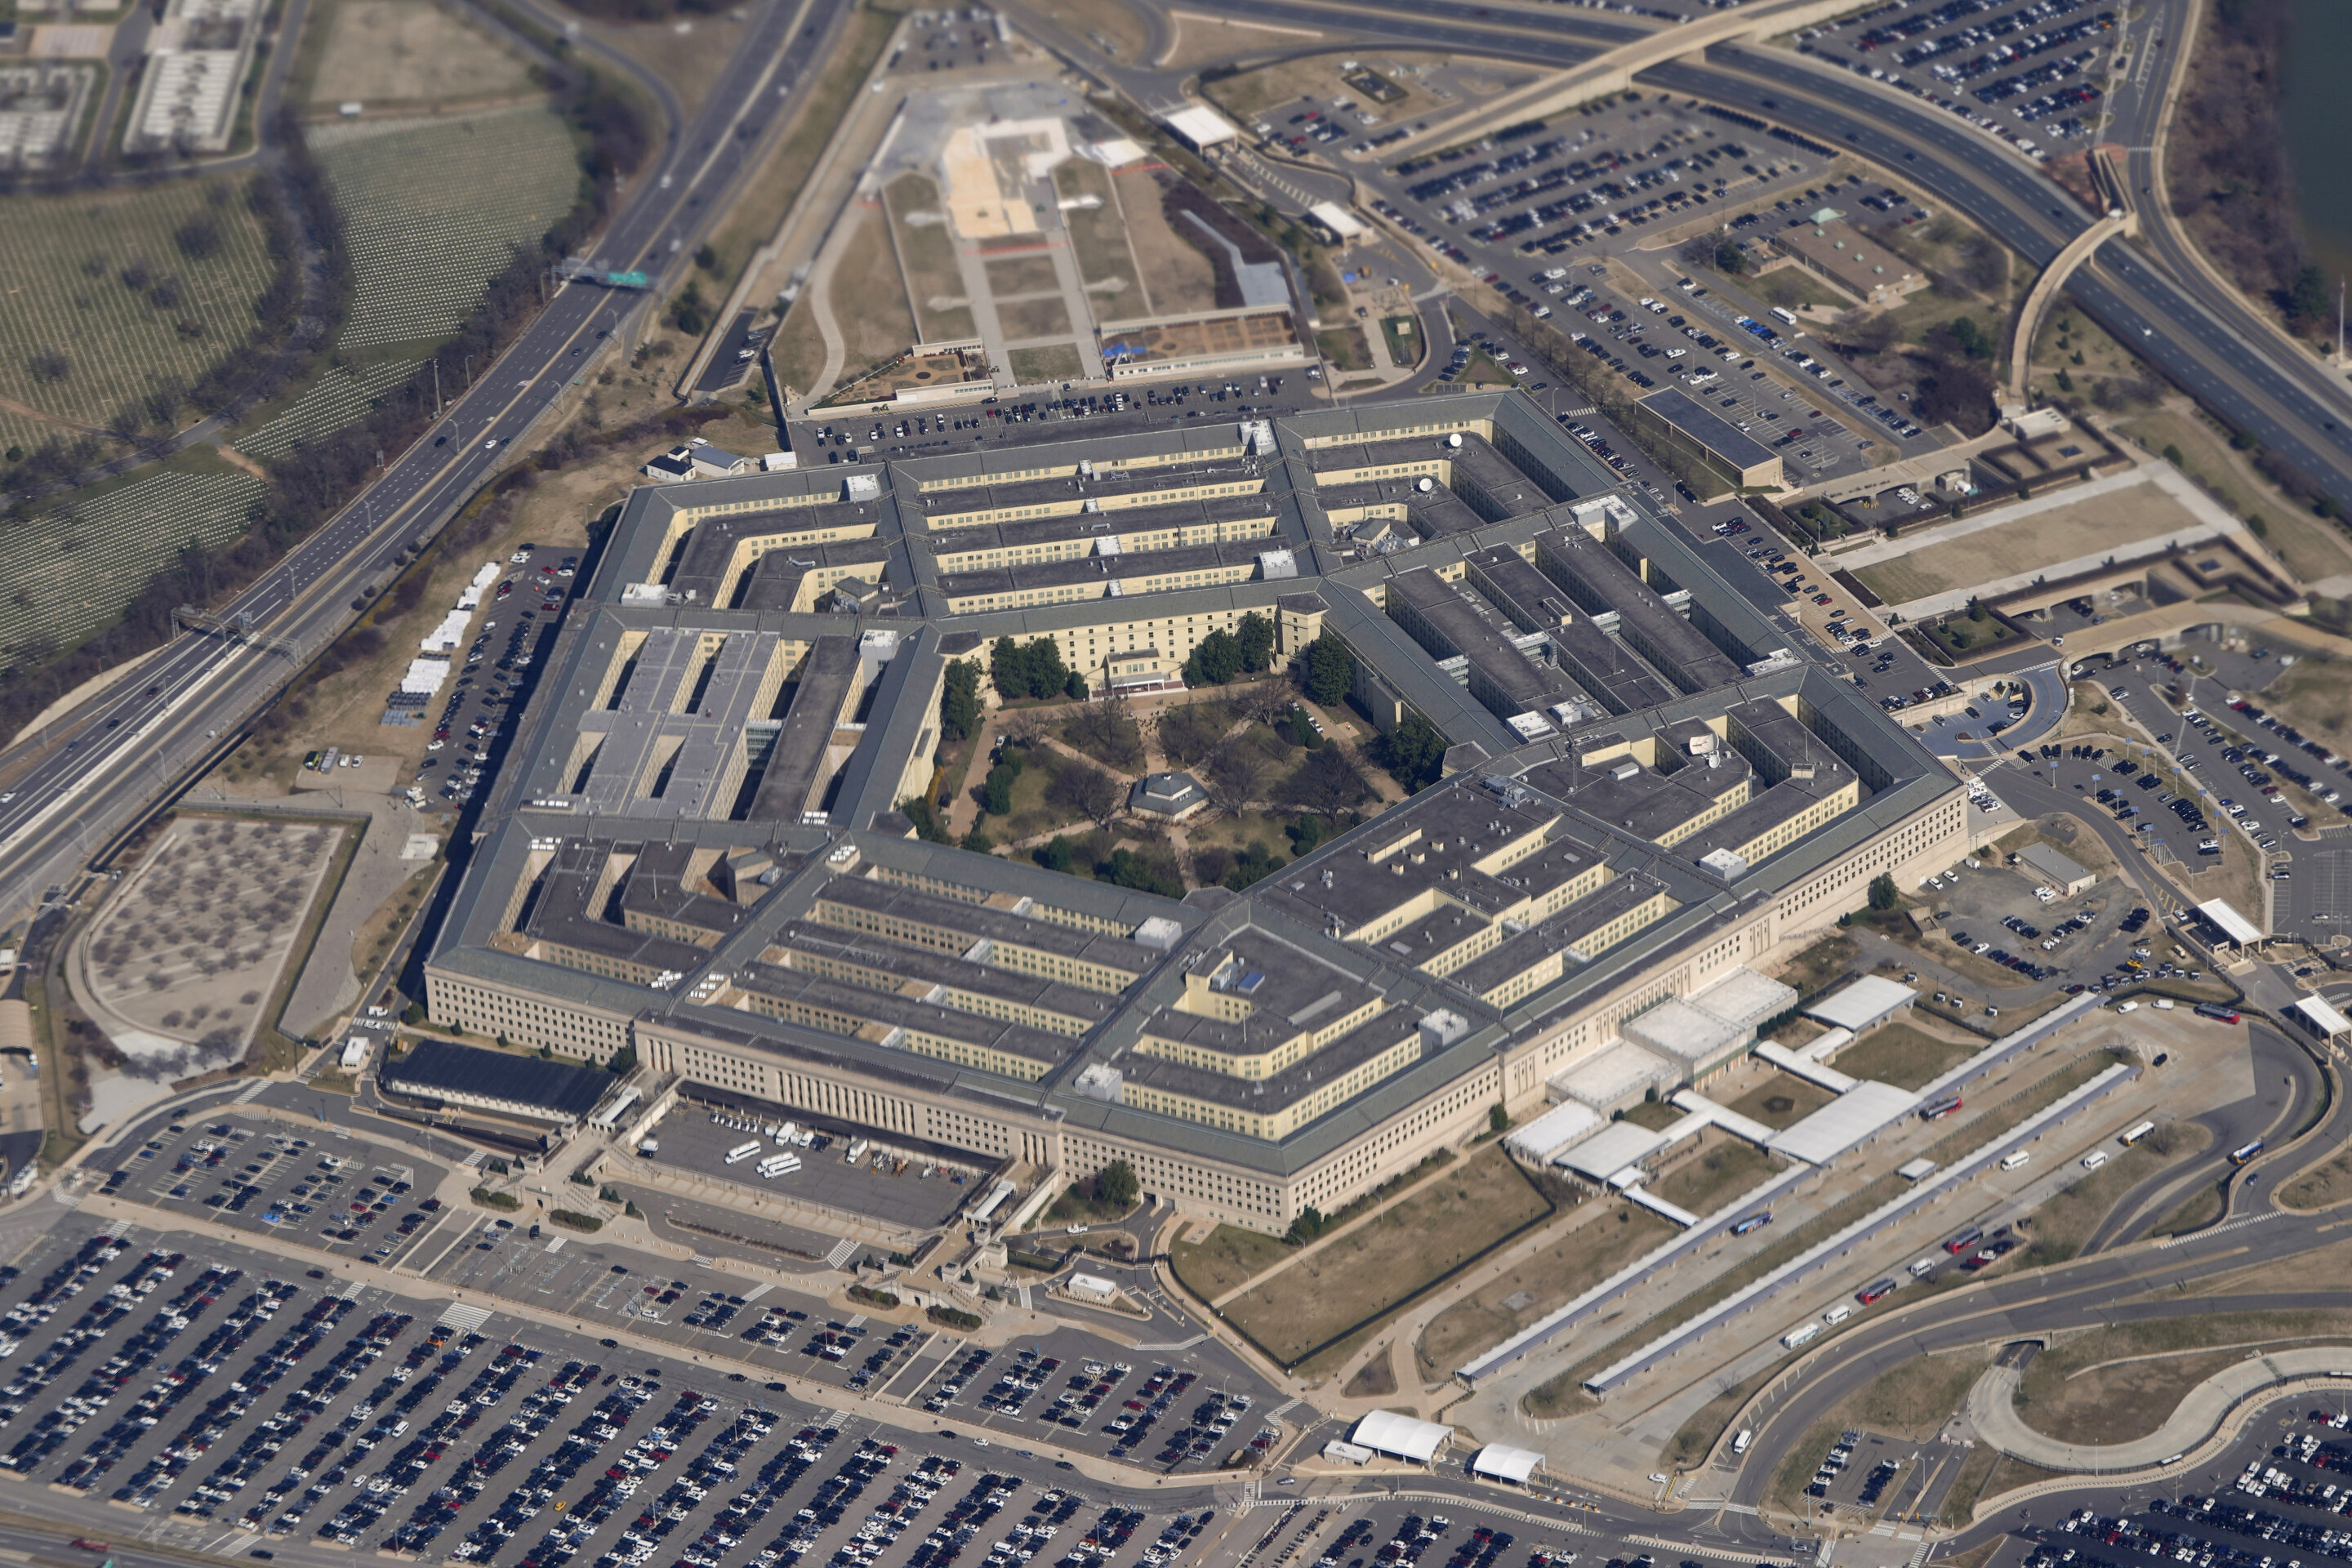 #Pentagon has received ‘several hundreds’ of new UFO reports